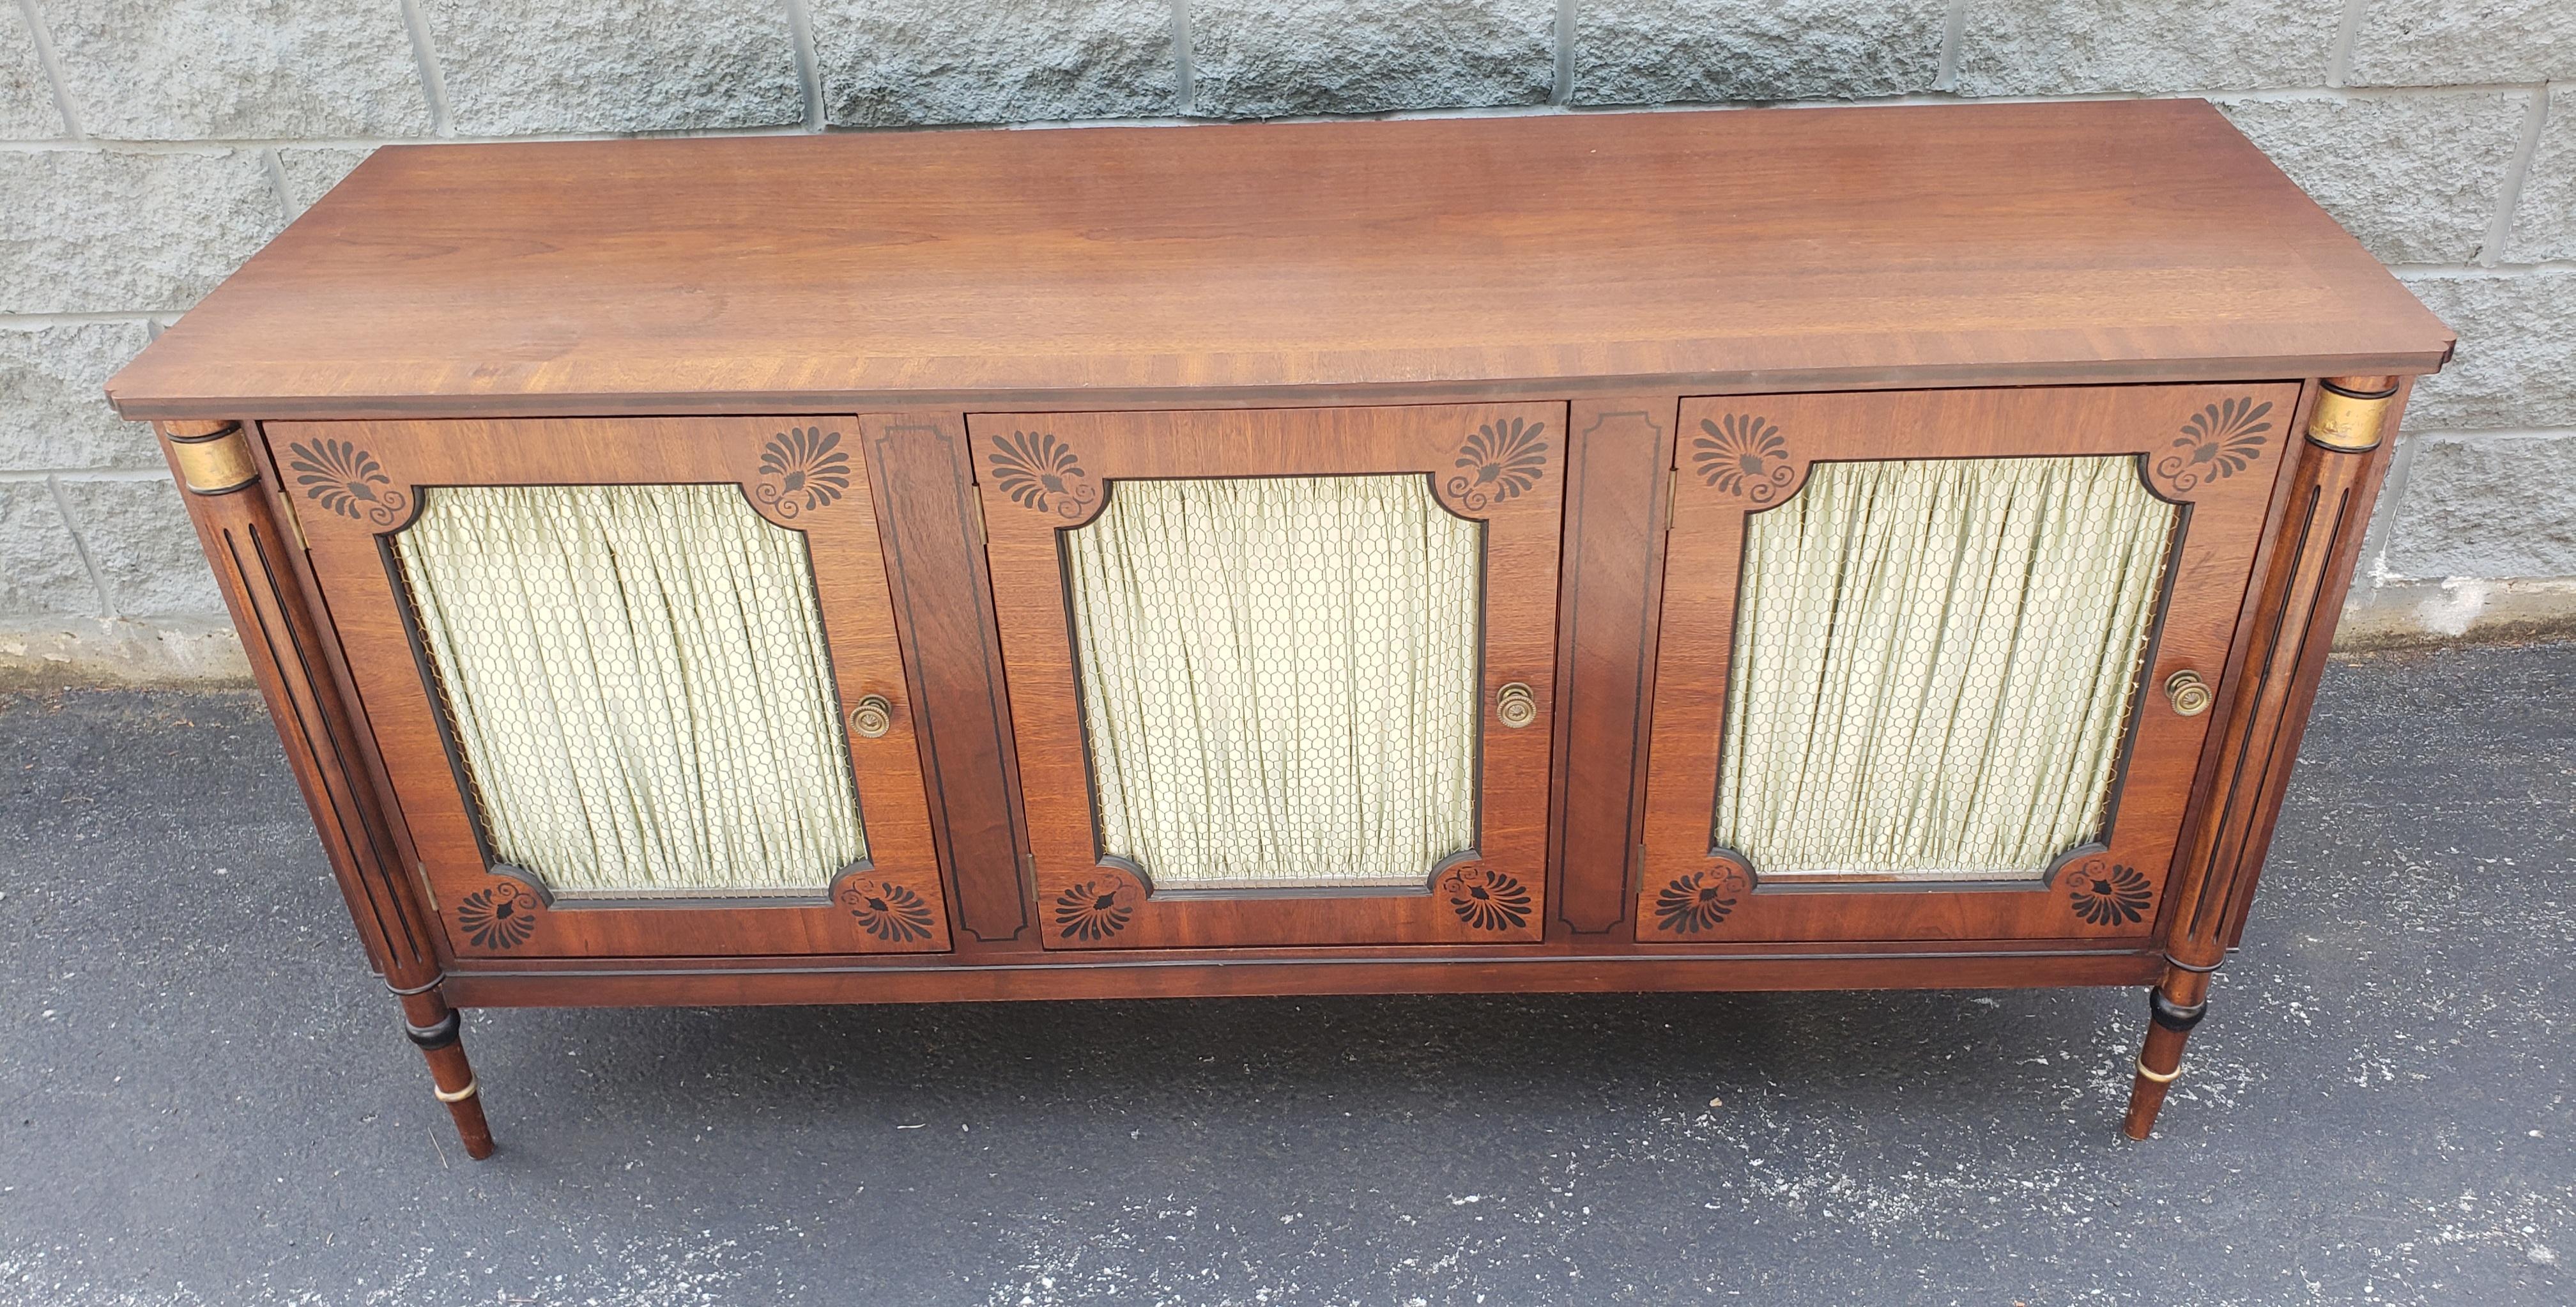 British Colonial Nicholas James Neoclassic Mahogany Sideboard with Curtains and Mesh Doors